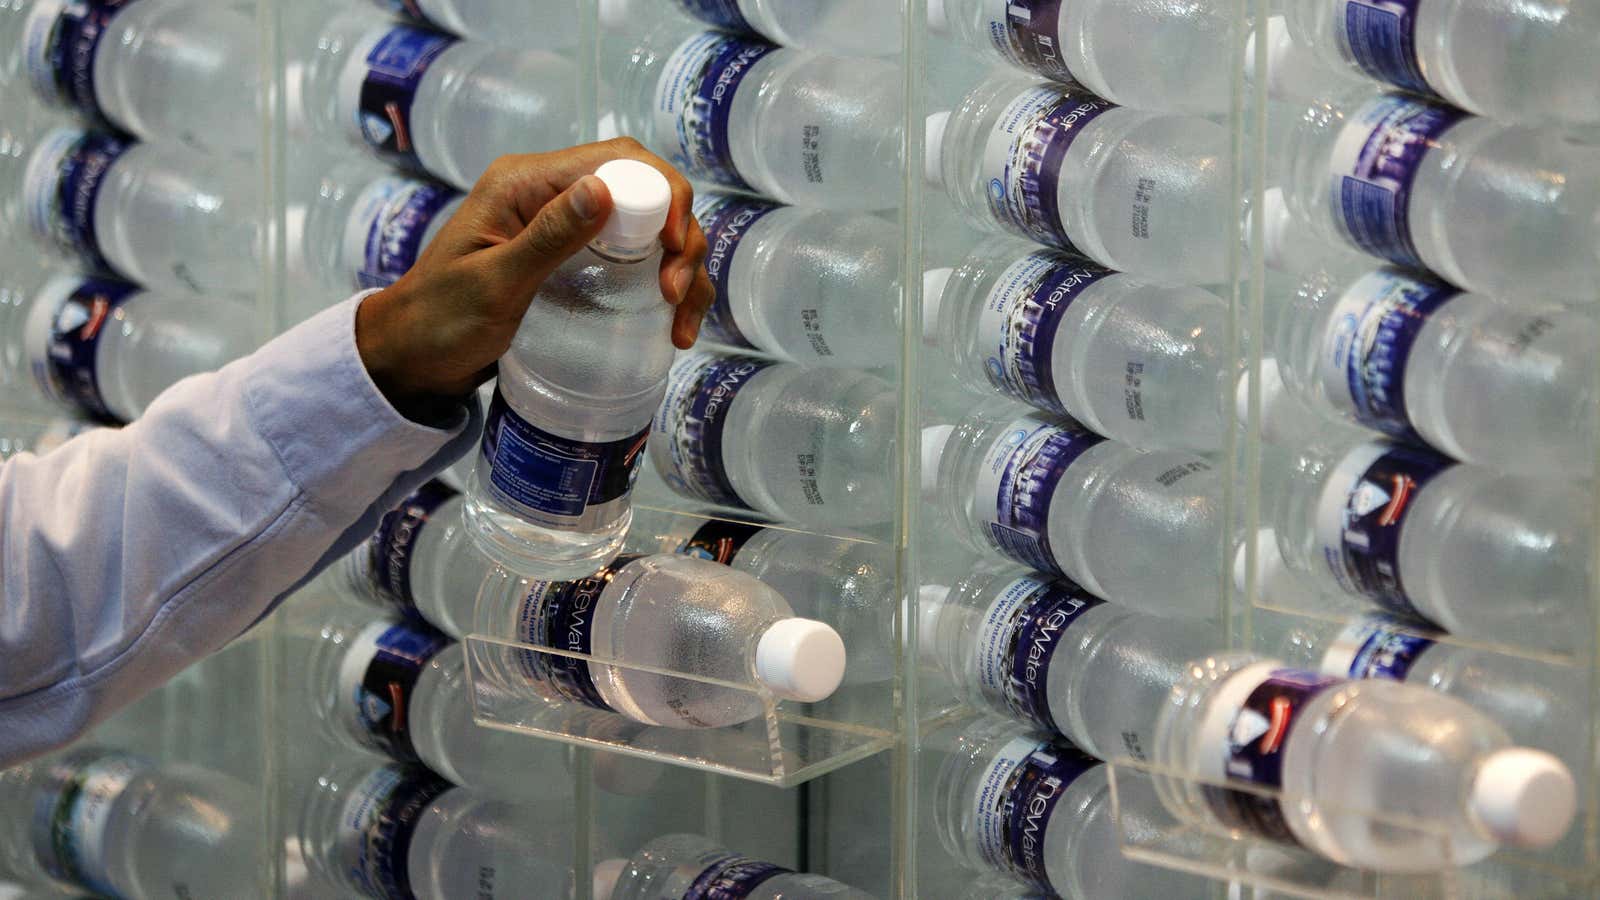 “Gluten-free” water shows how ridiculous food labeling has become